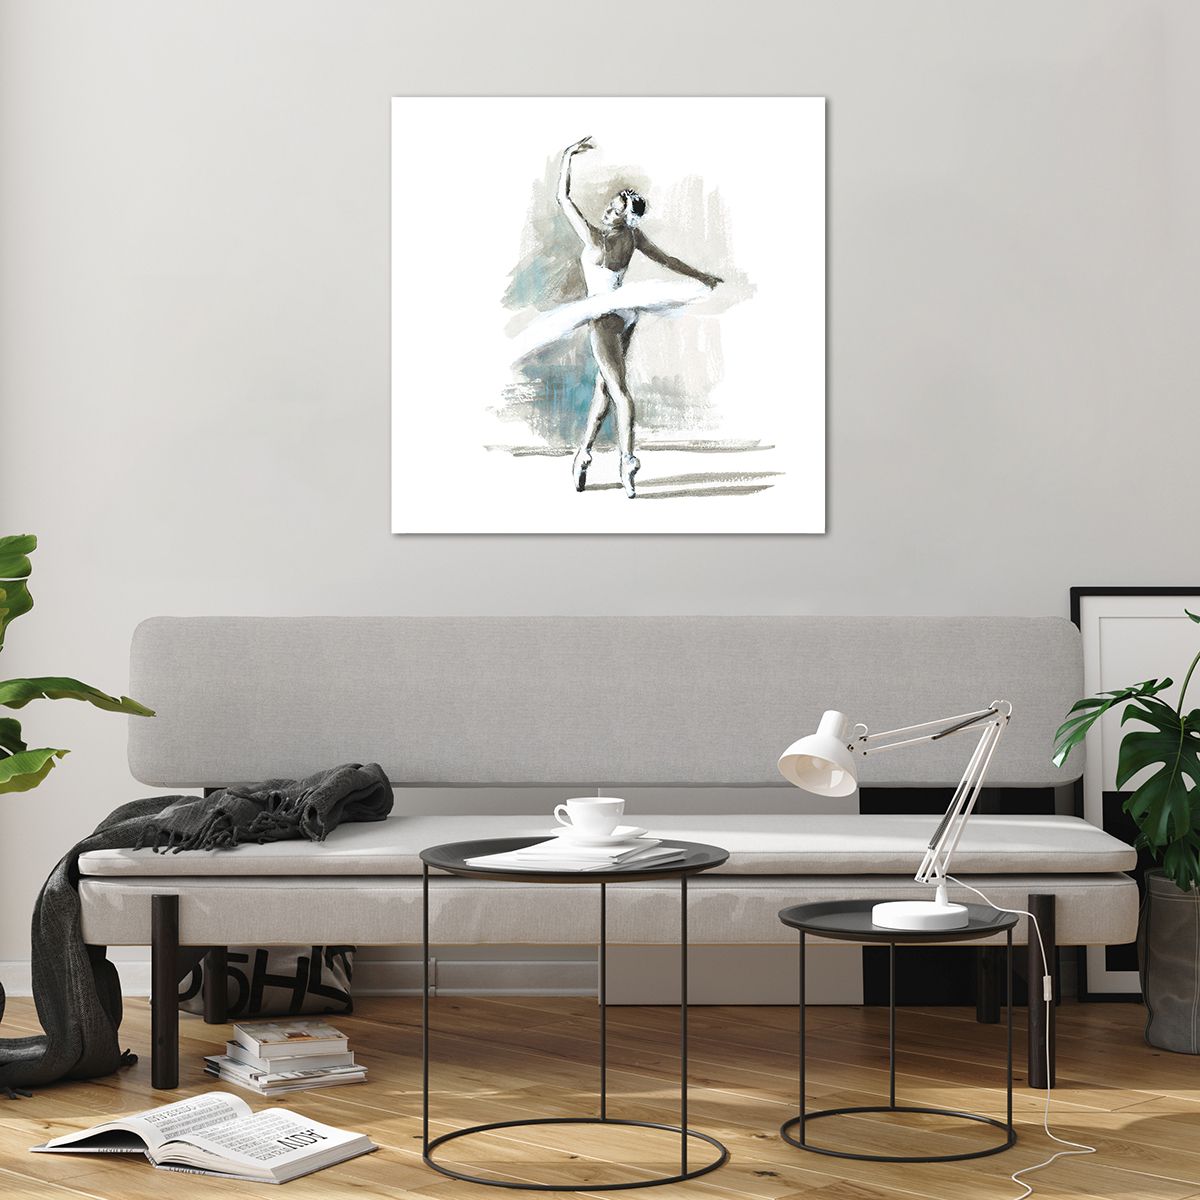 Glass picture  Ballerina, Glass picture  Dance, Glass picture  Ballet, Glass picture  Graphics, Glass picture  Painting